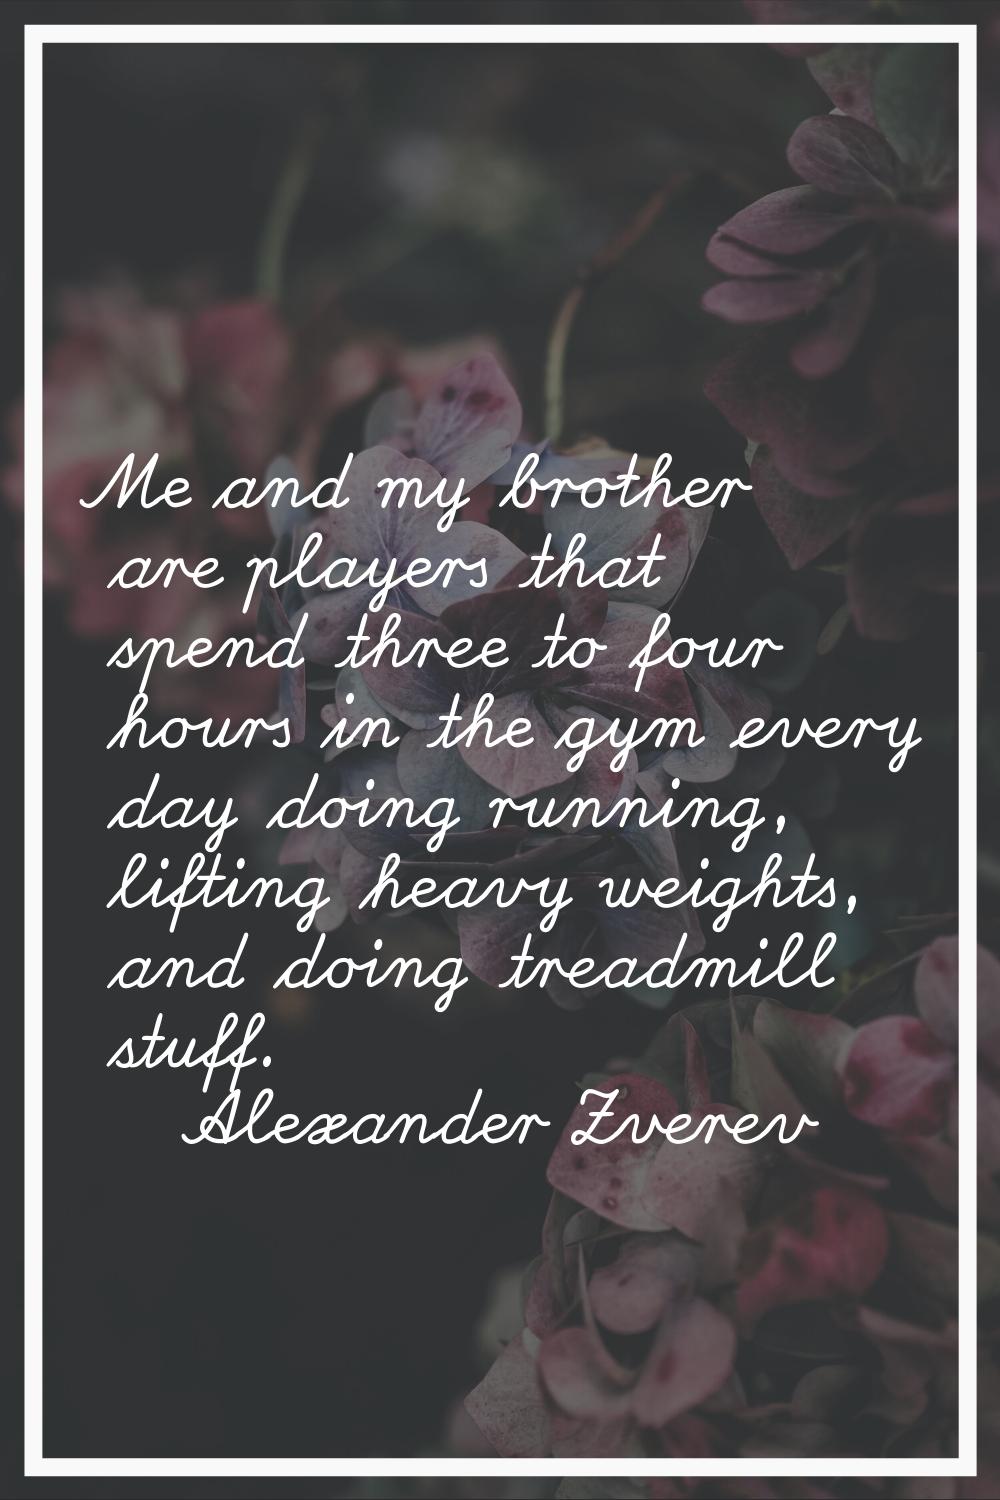 Me and my brother are players that spend three to four hours in the gym every day doing running, li